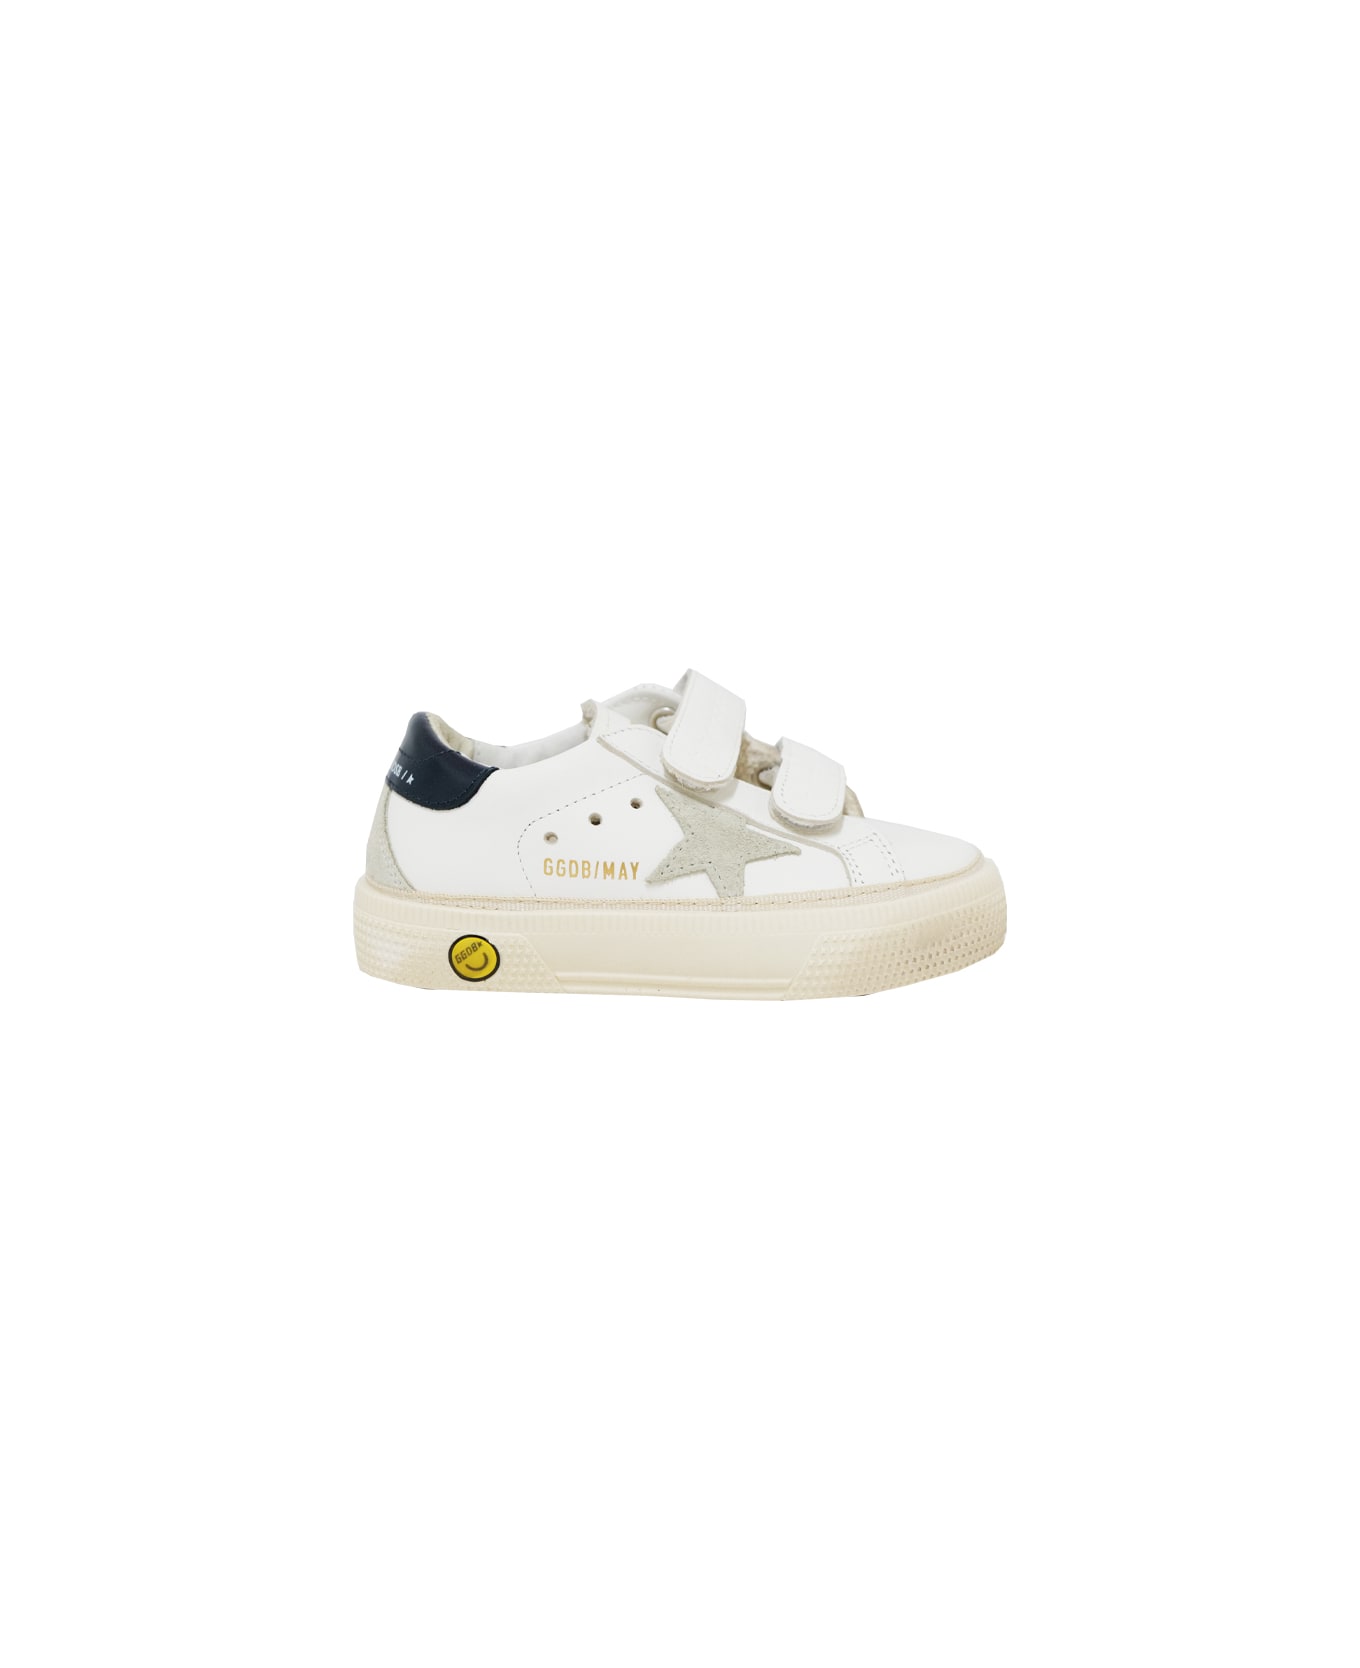 Golden Goose Leather Sneakers - White シューズ